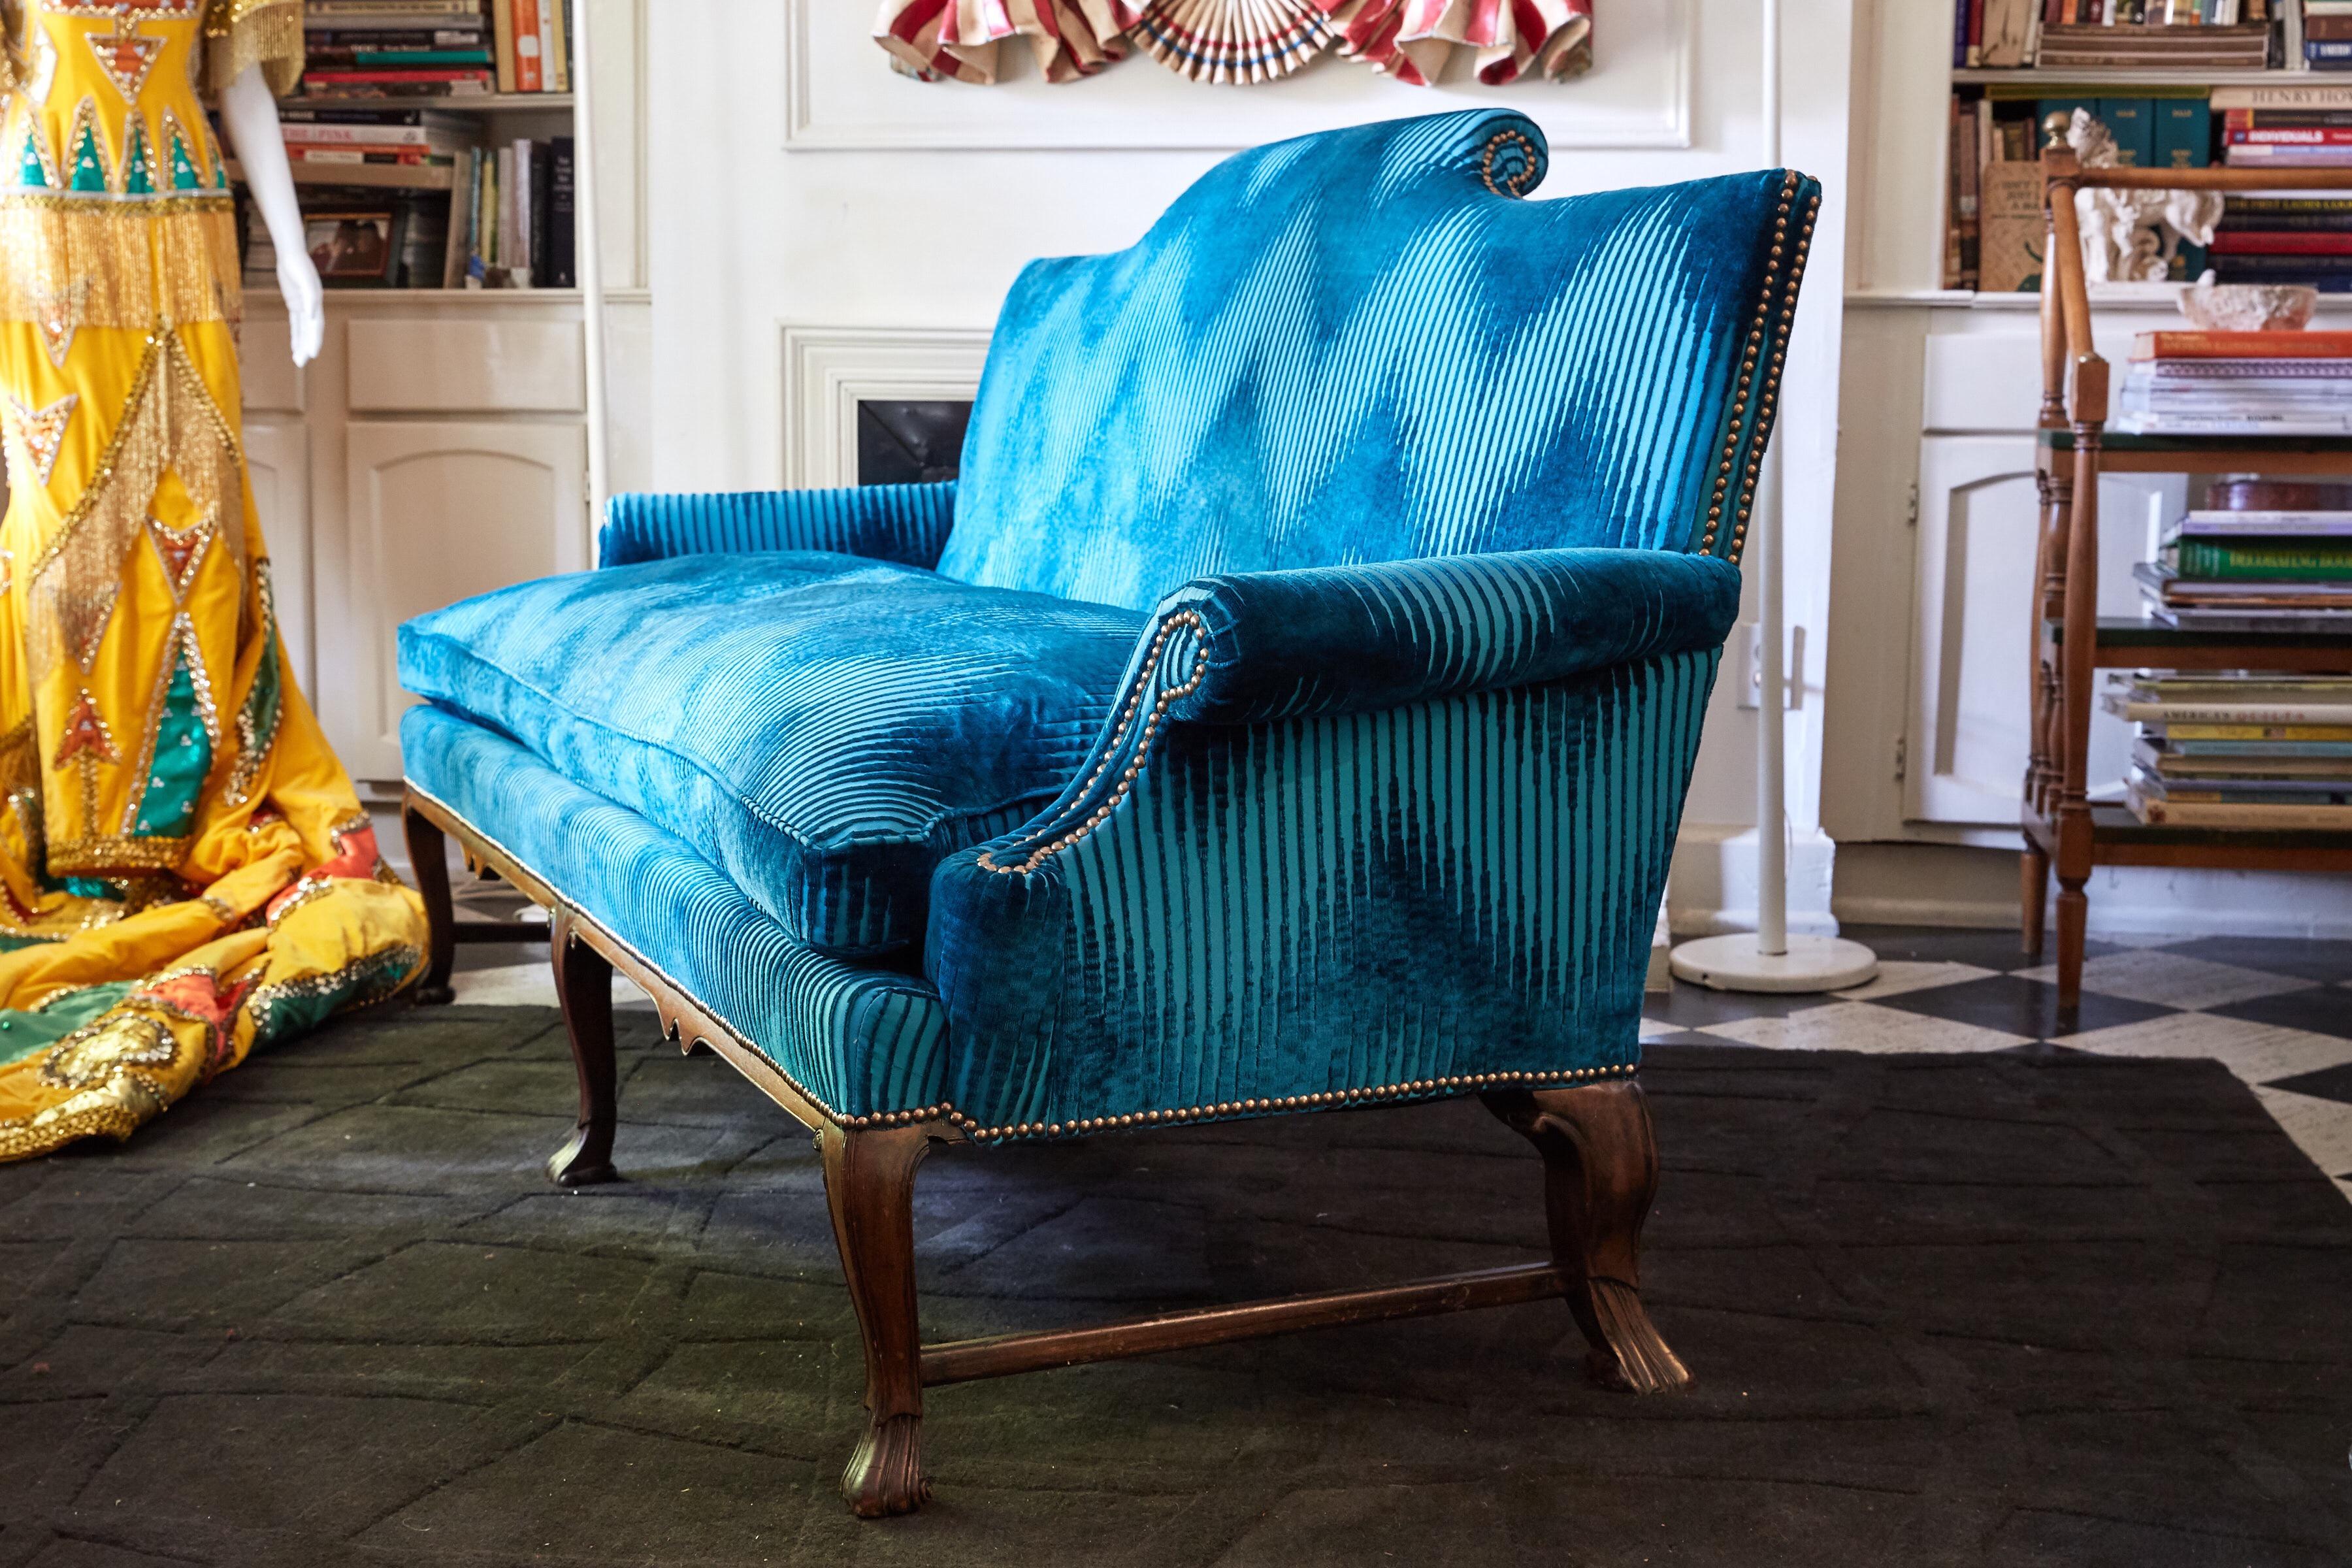 19th century English sofa in the Georgian style with a carved mahogany frame. The sofa has a cushion back and one cushion down seat. It has been reupholstered in turquoise Jim Thompson Bargello fabric and accented with rose gold nailheads.